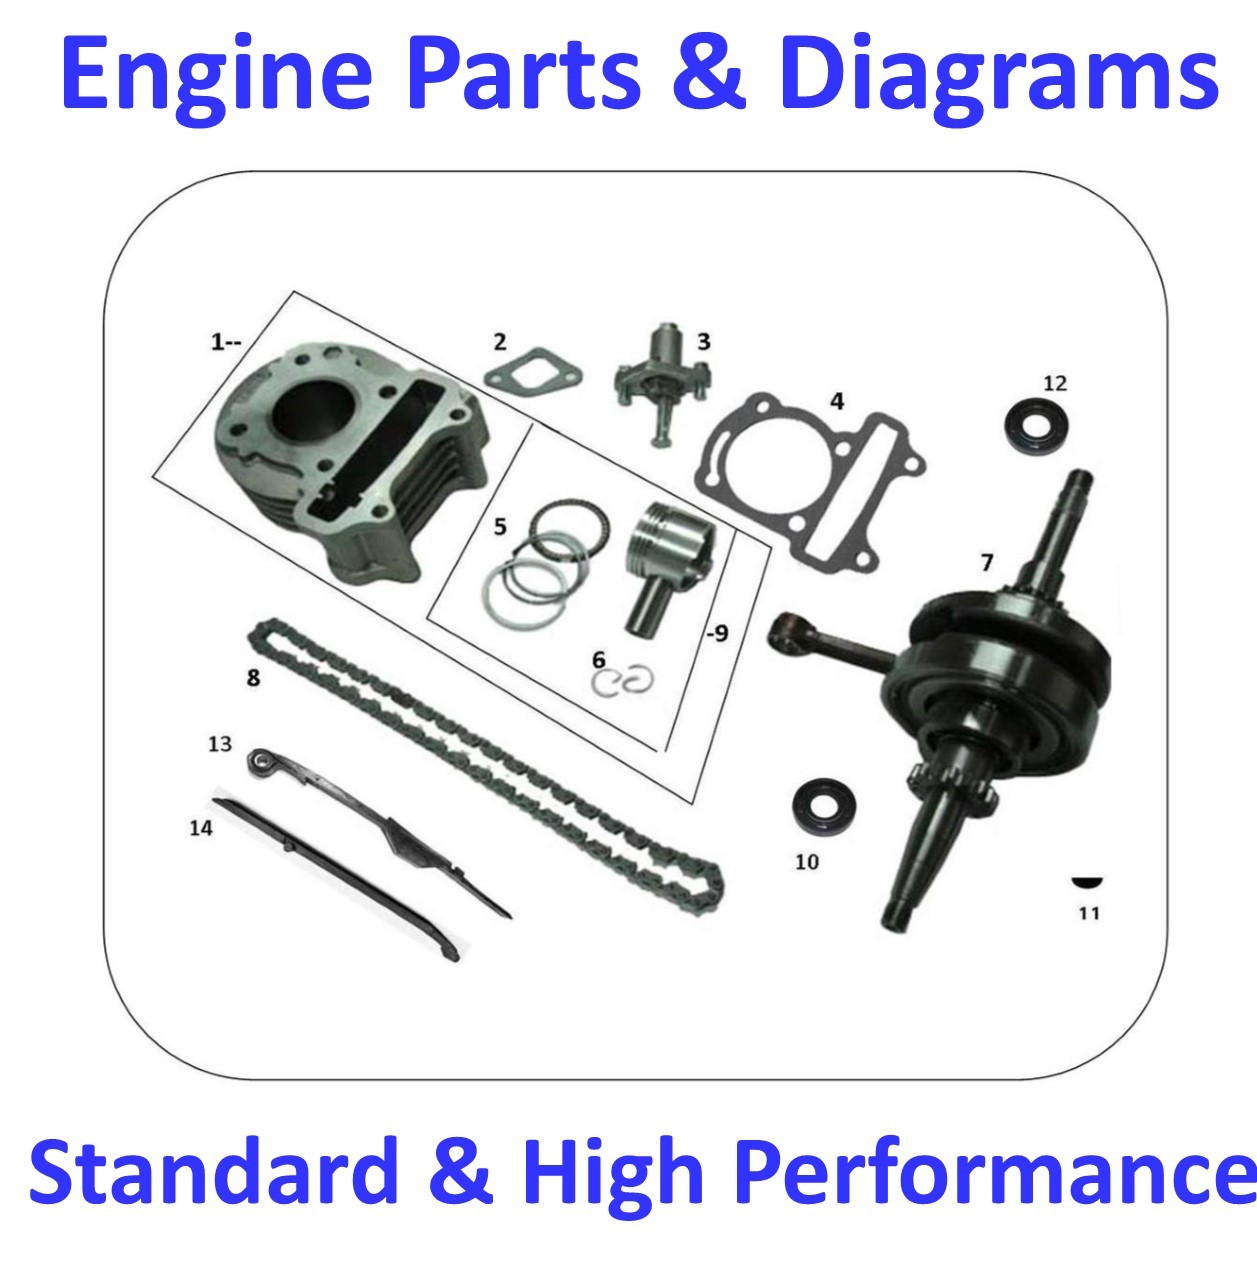 Engine Parts & Diagrams Standard & High Performance